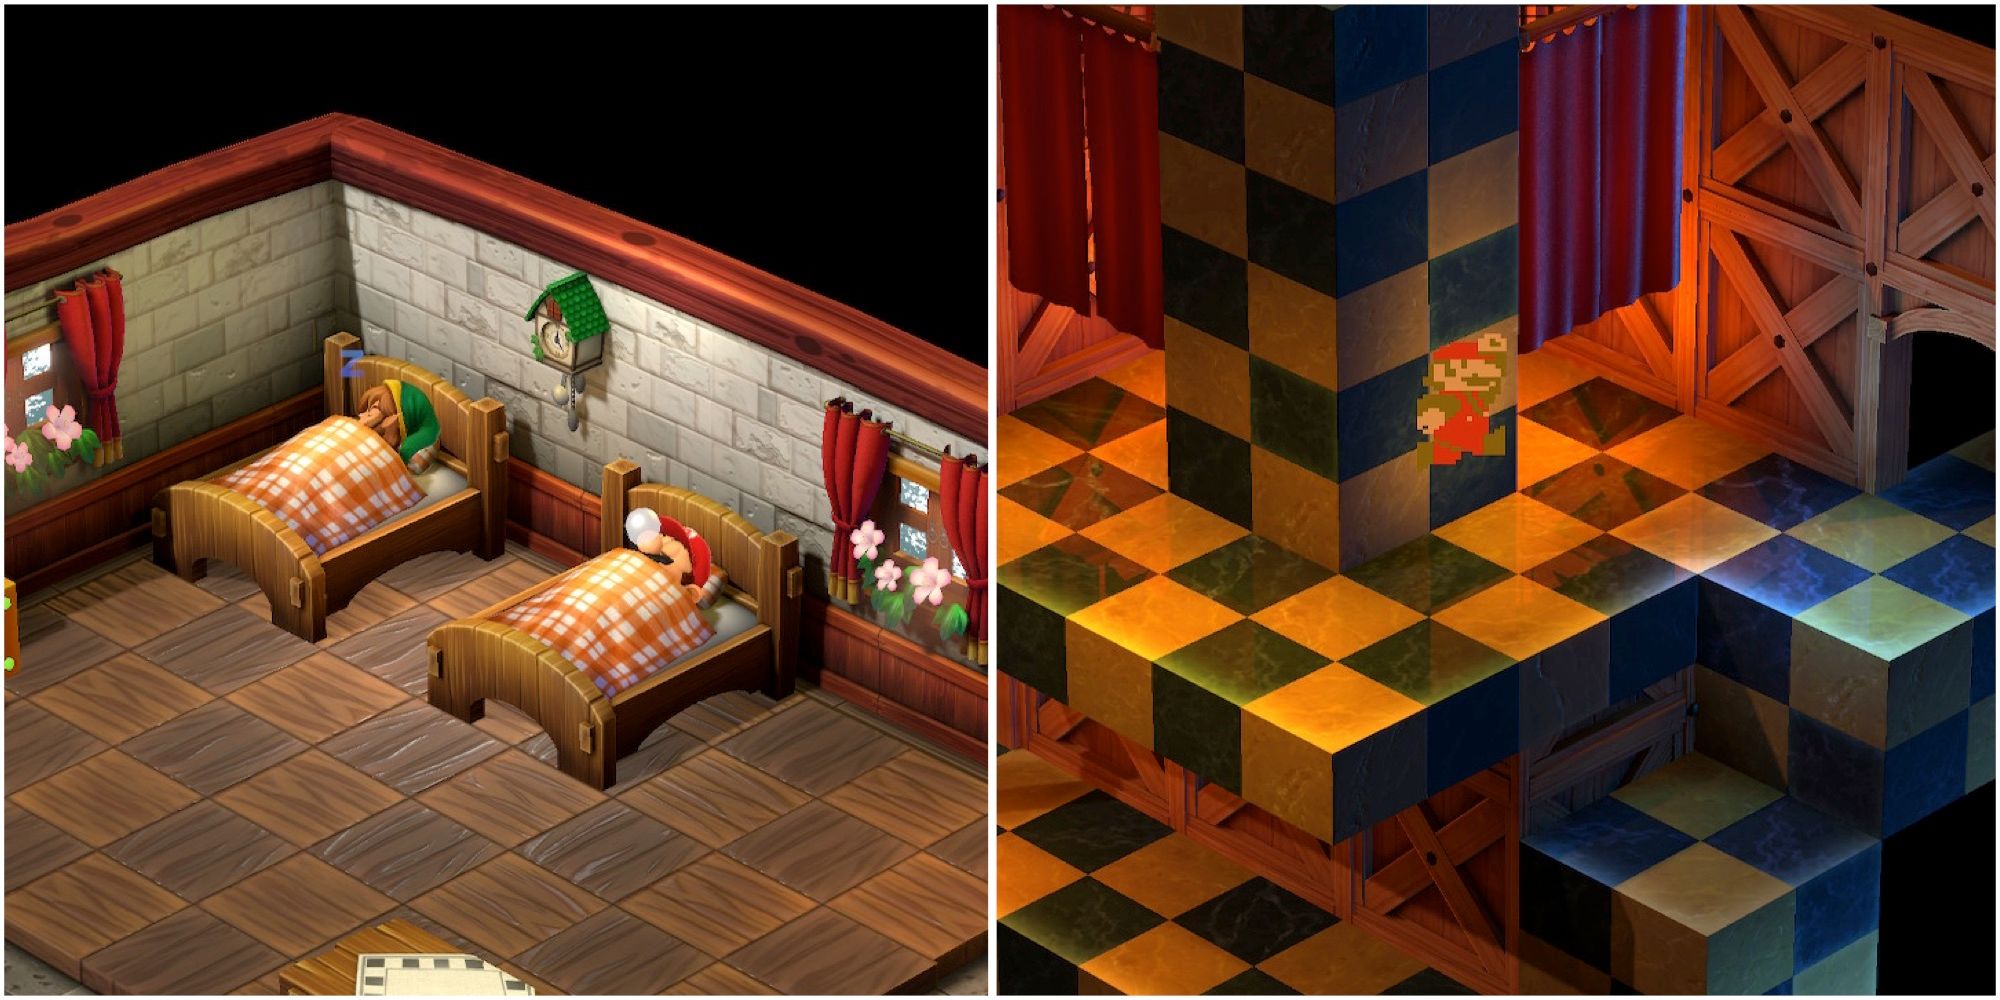 Sleeping next to Link and pixel Mario in Super Mario RPG